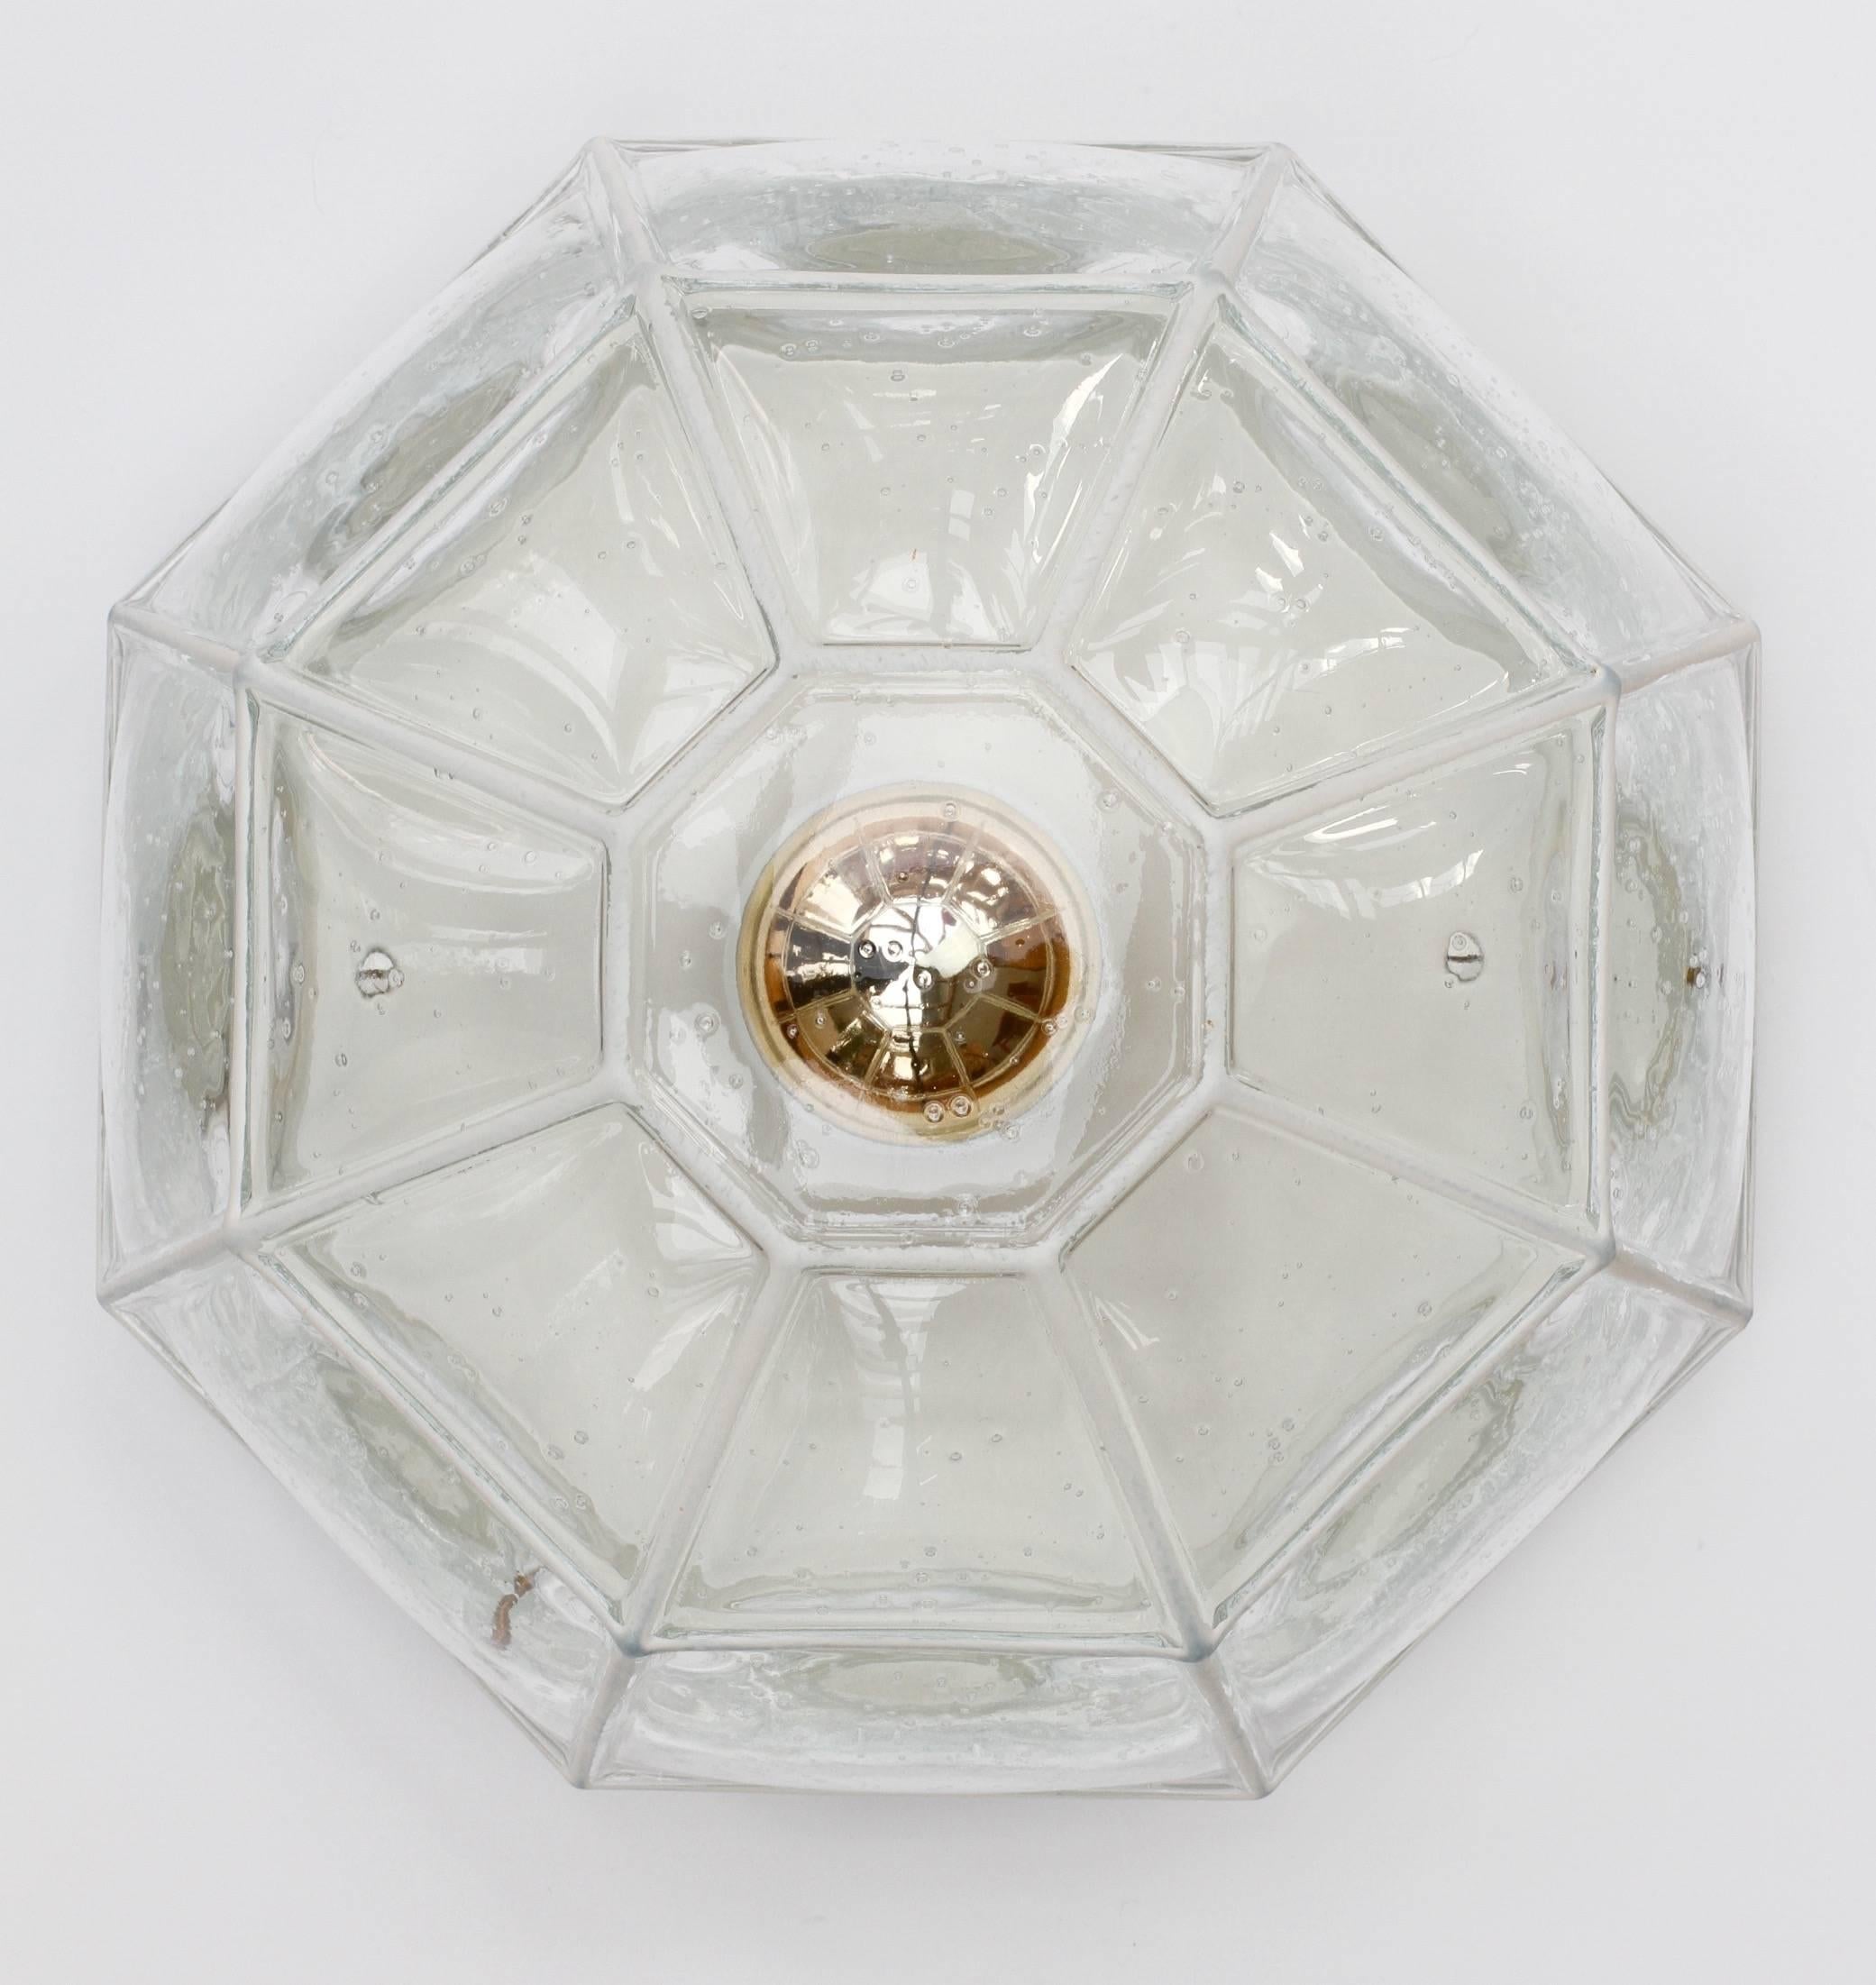 Beautifully minimal, geometric and simply shaped large wall or ceiling flush mount light fixture by Glashütte Limburg, Germany, circa 1965. The bubble glass bulges slightly out of its white 